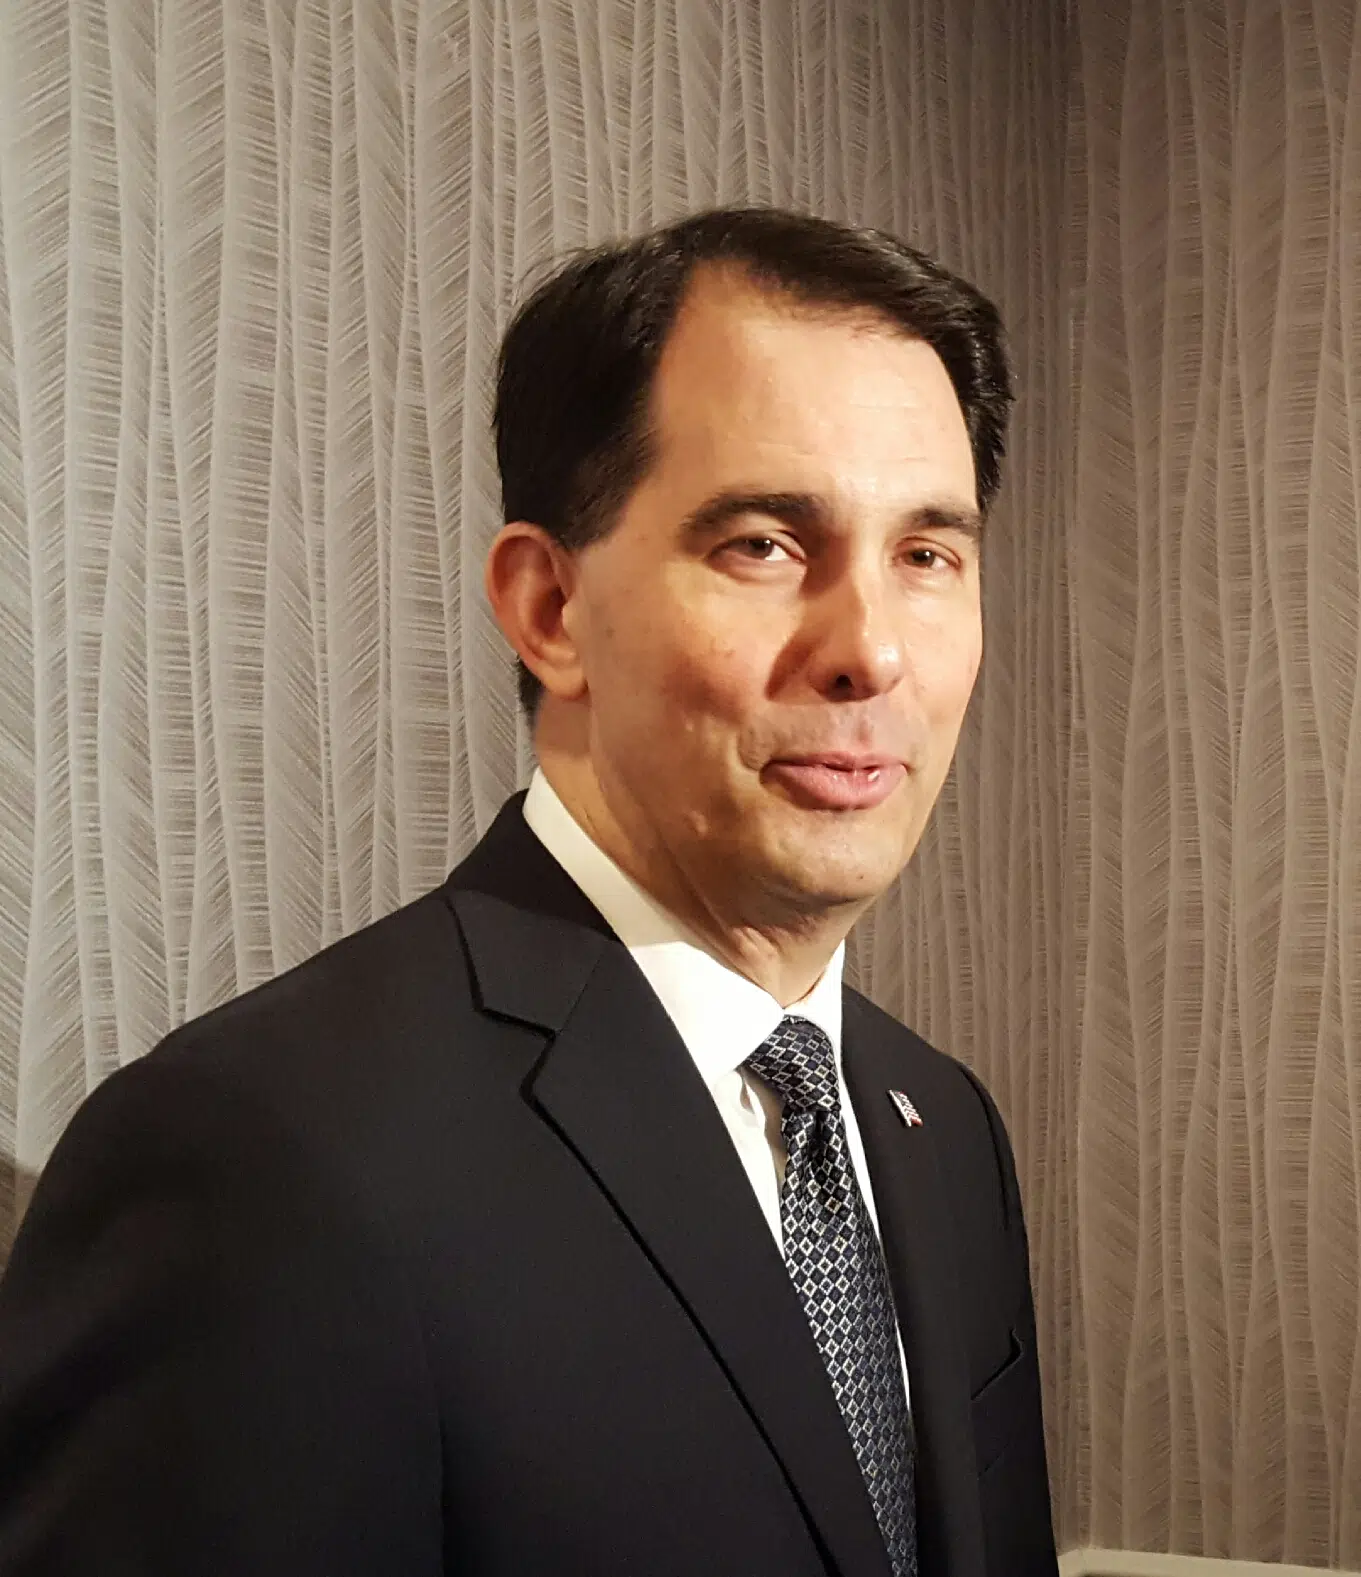 Governor Scott Walker says all hate should be denounced